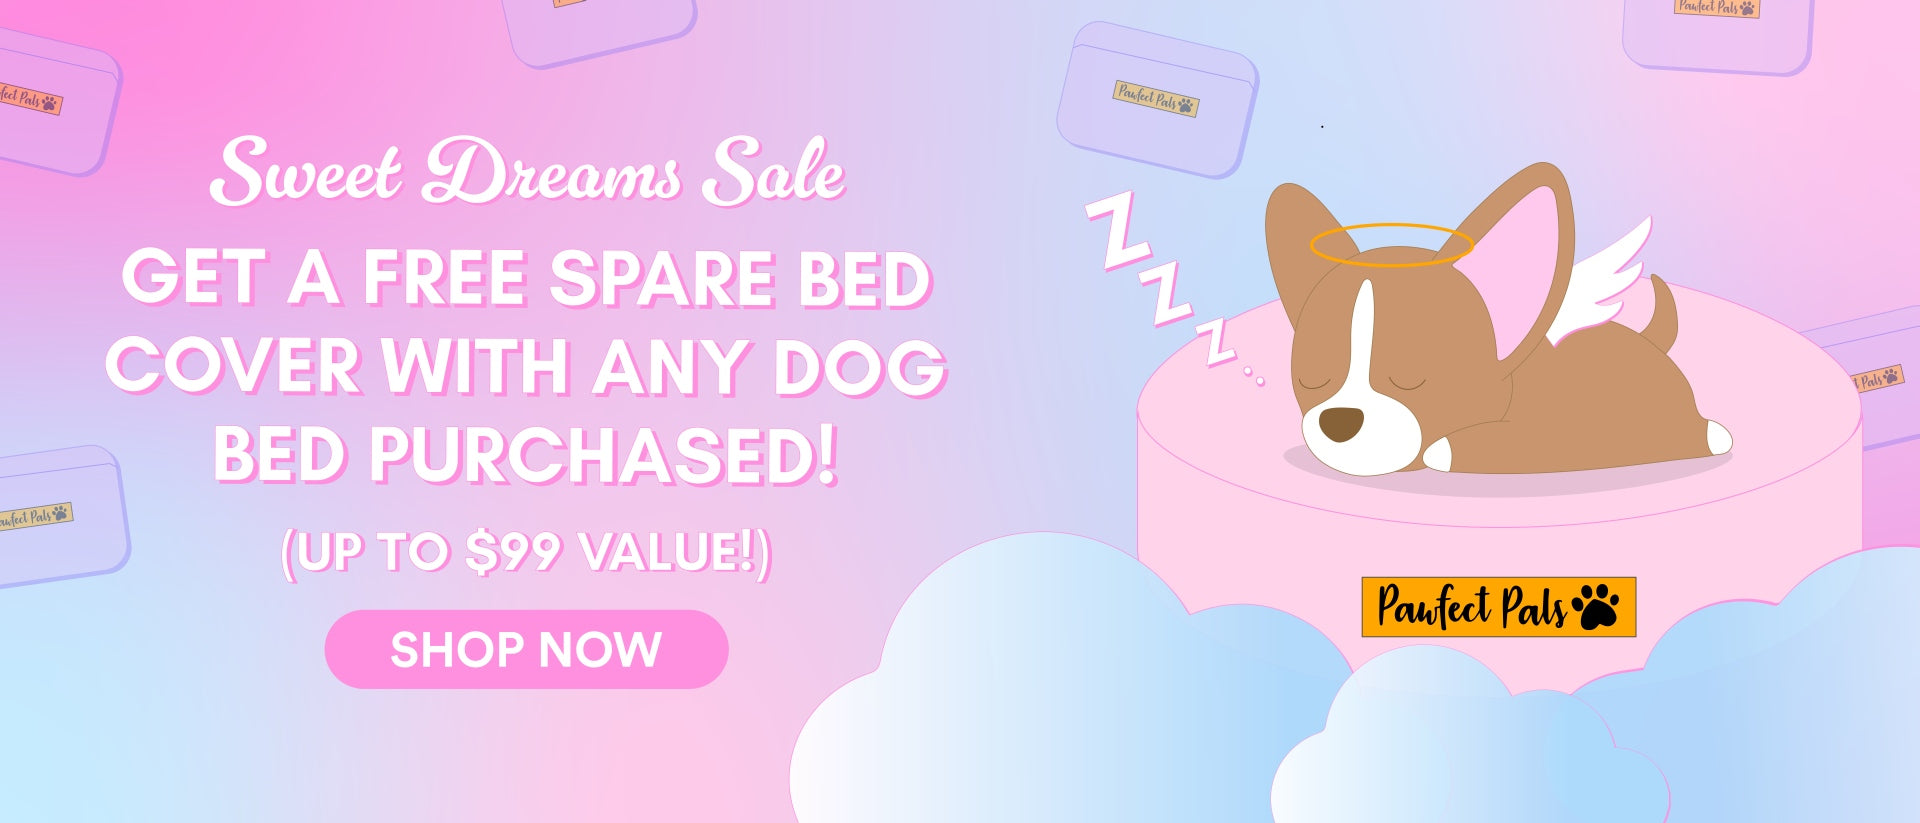 Sweet Dreams Sale! Get a free bed cover with the purchase of a Snuggle Bud or Cuddle Bud bed.